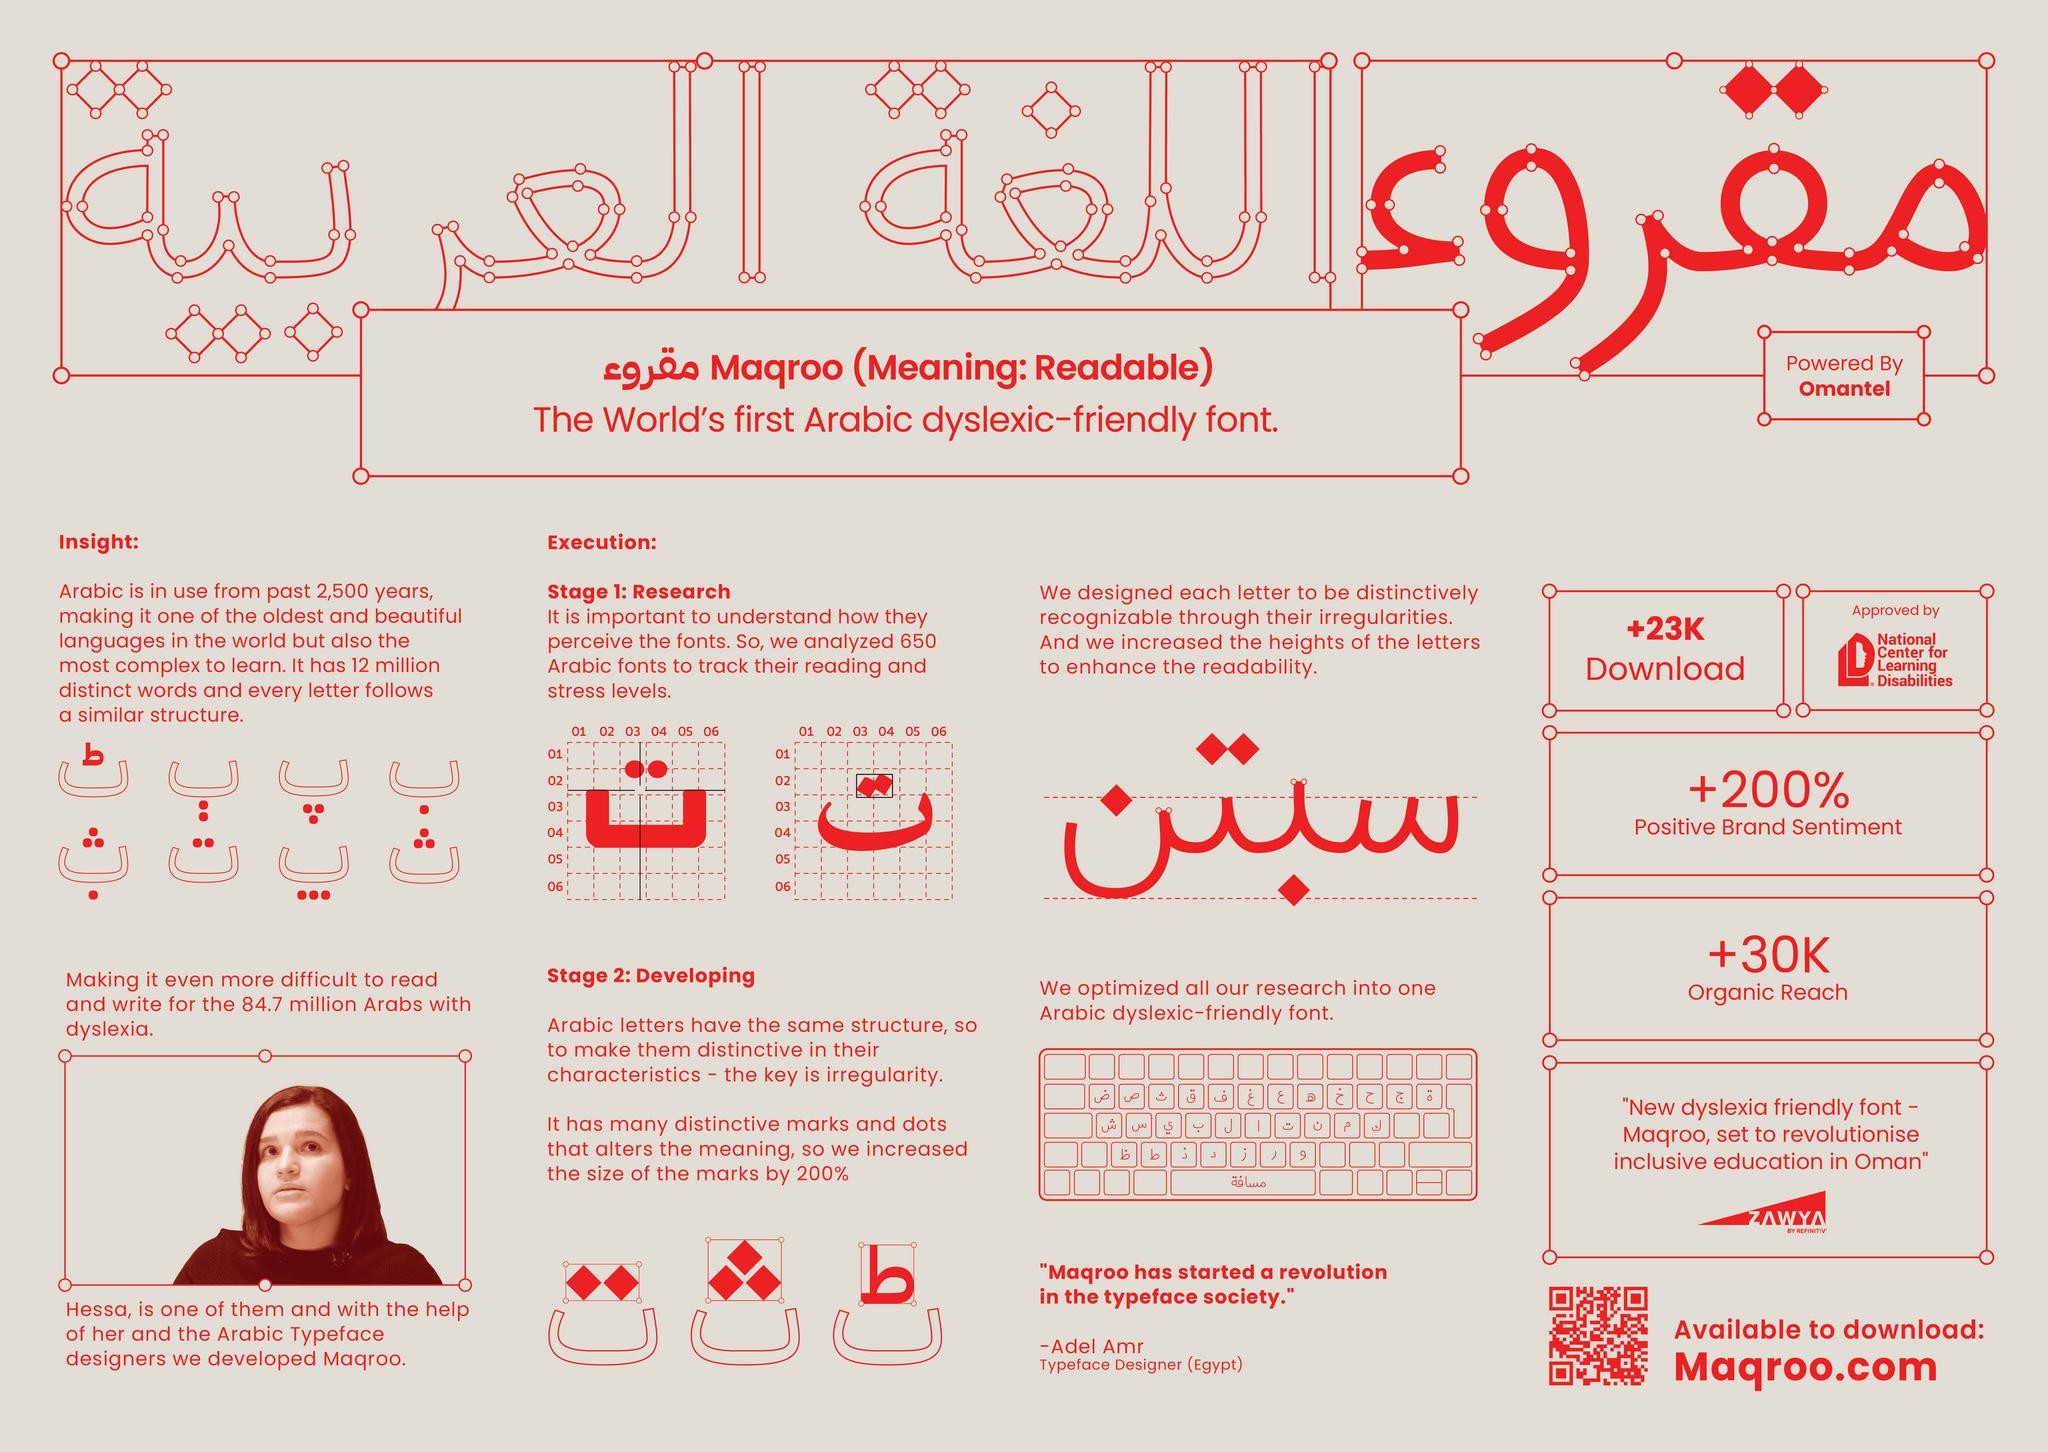 MAQROO - THE FIRST ARABIC DYSLEXIC FONT